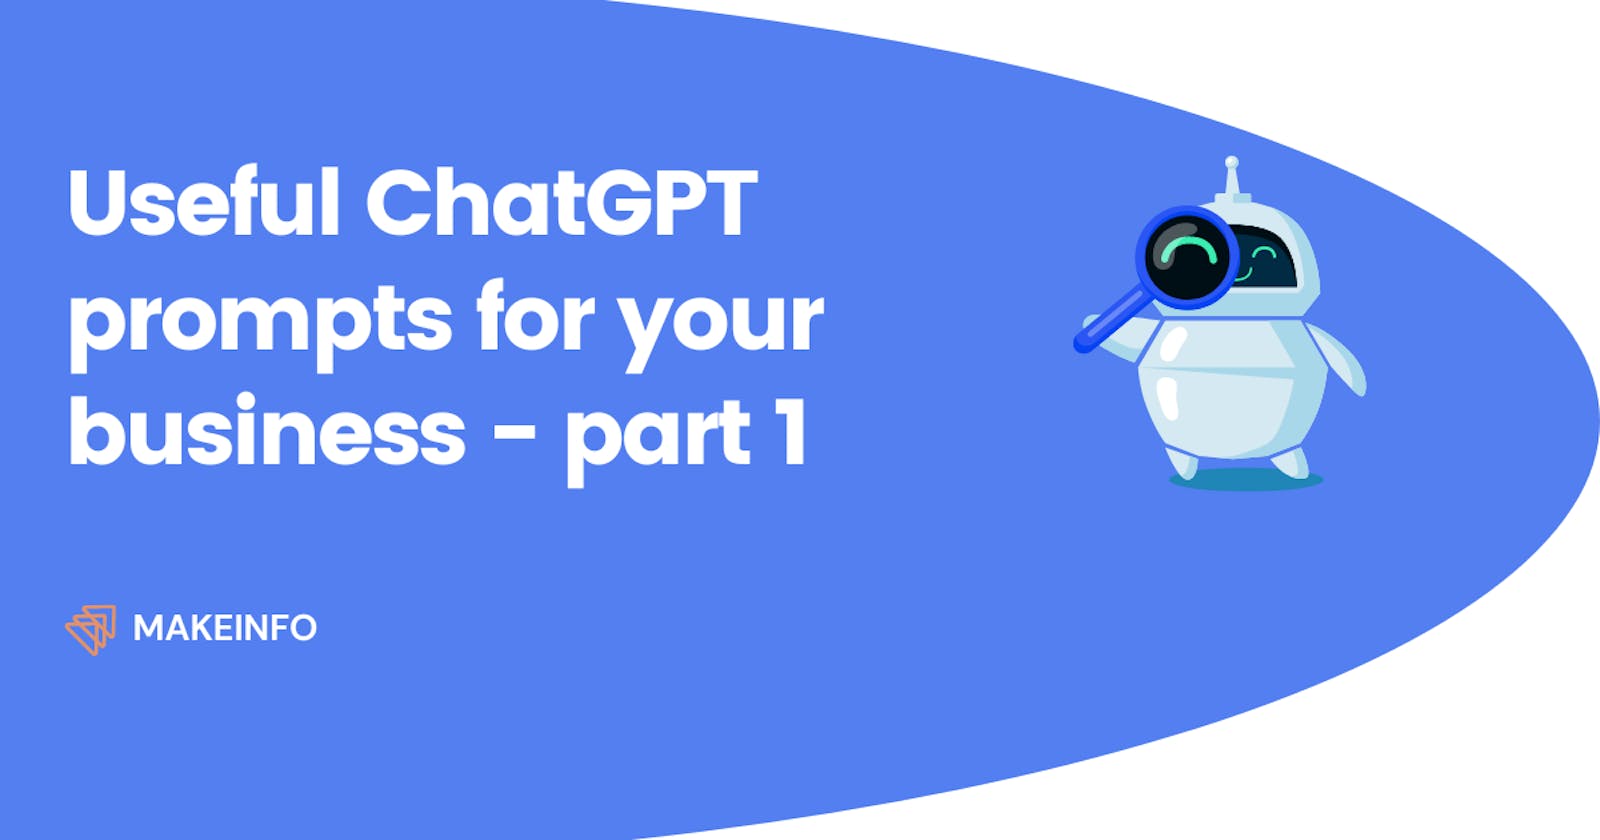 Useful ChatGPT prompts for business people to be more productive - part 1